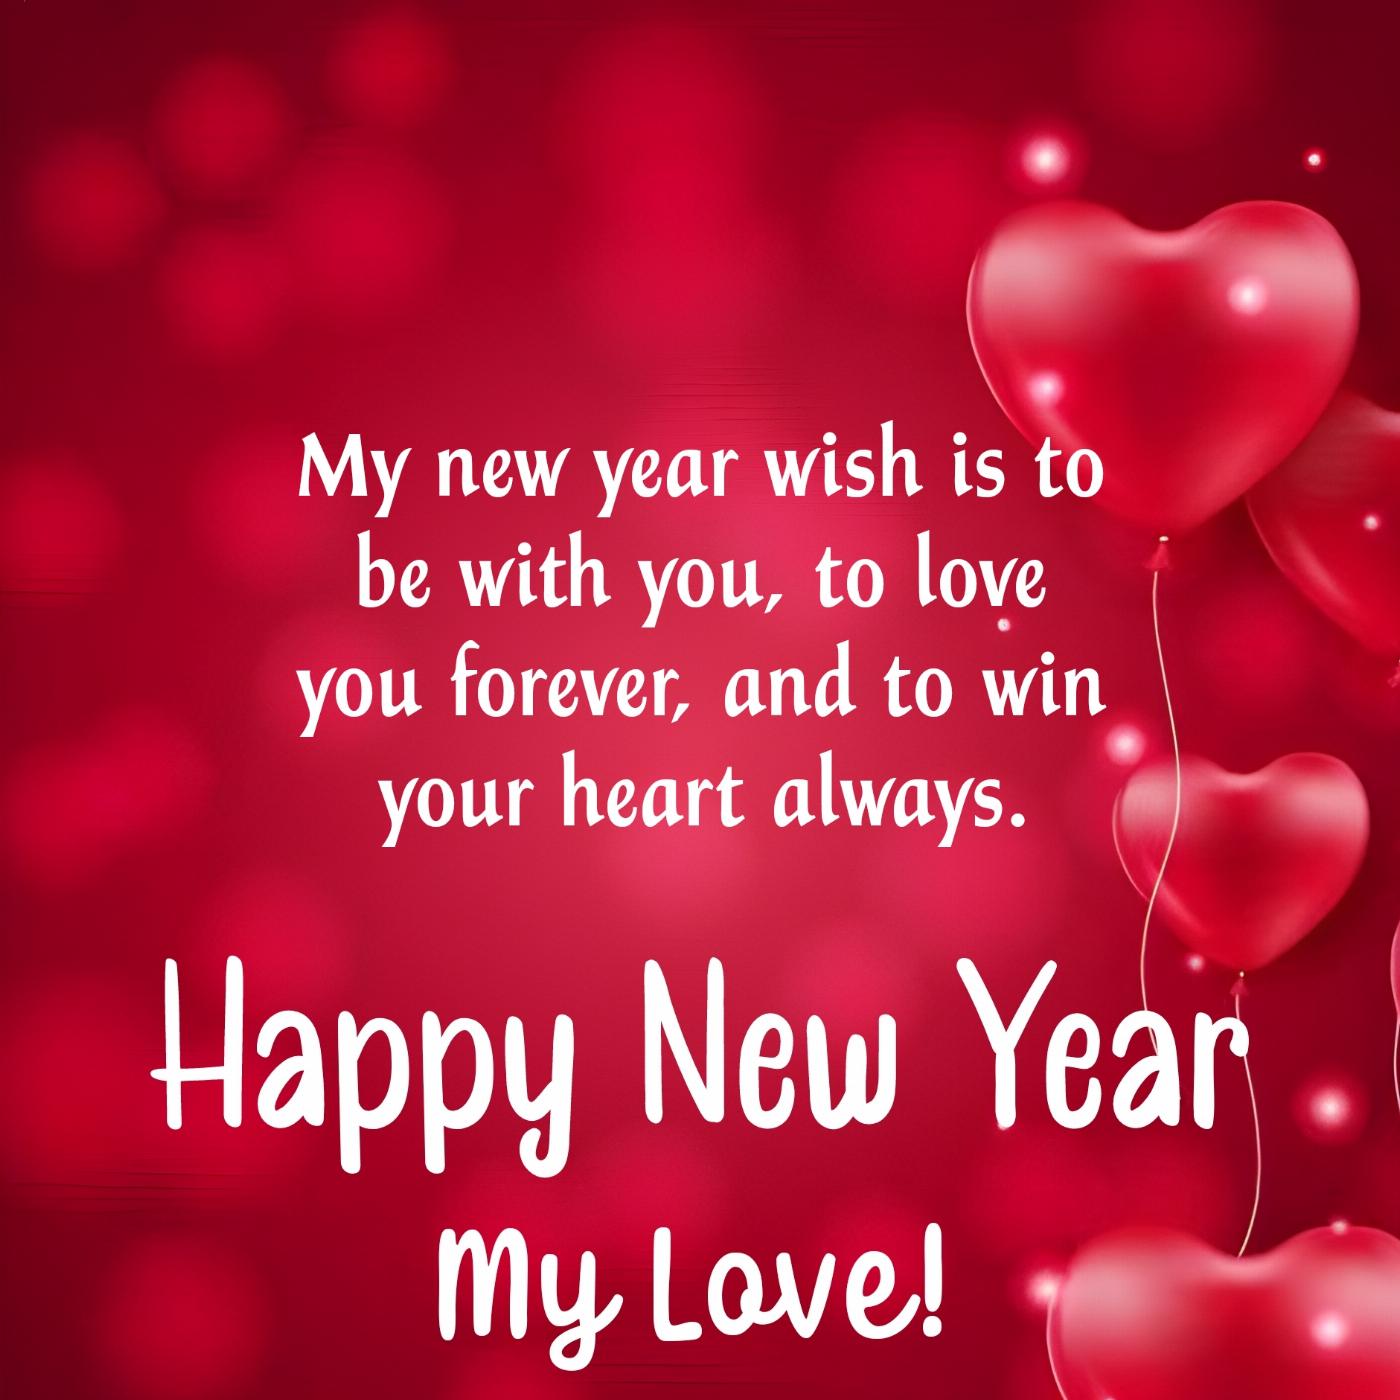 My new year wish is to be with you to love you forever